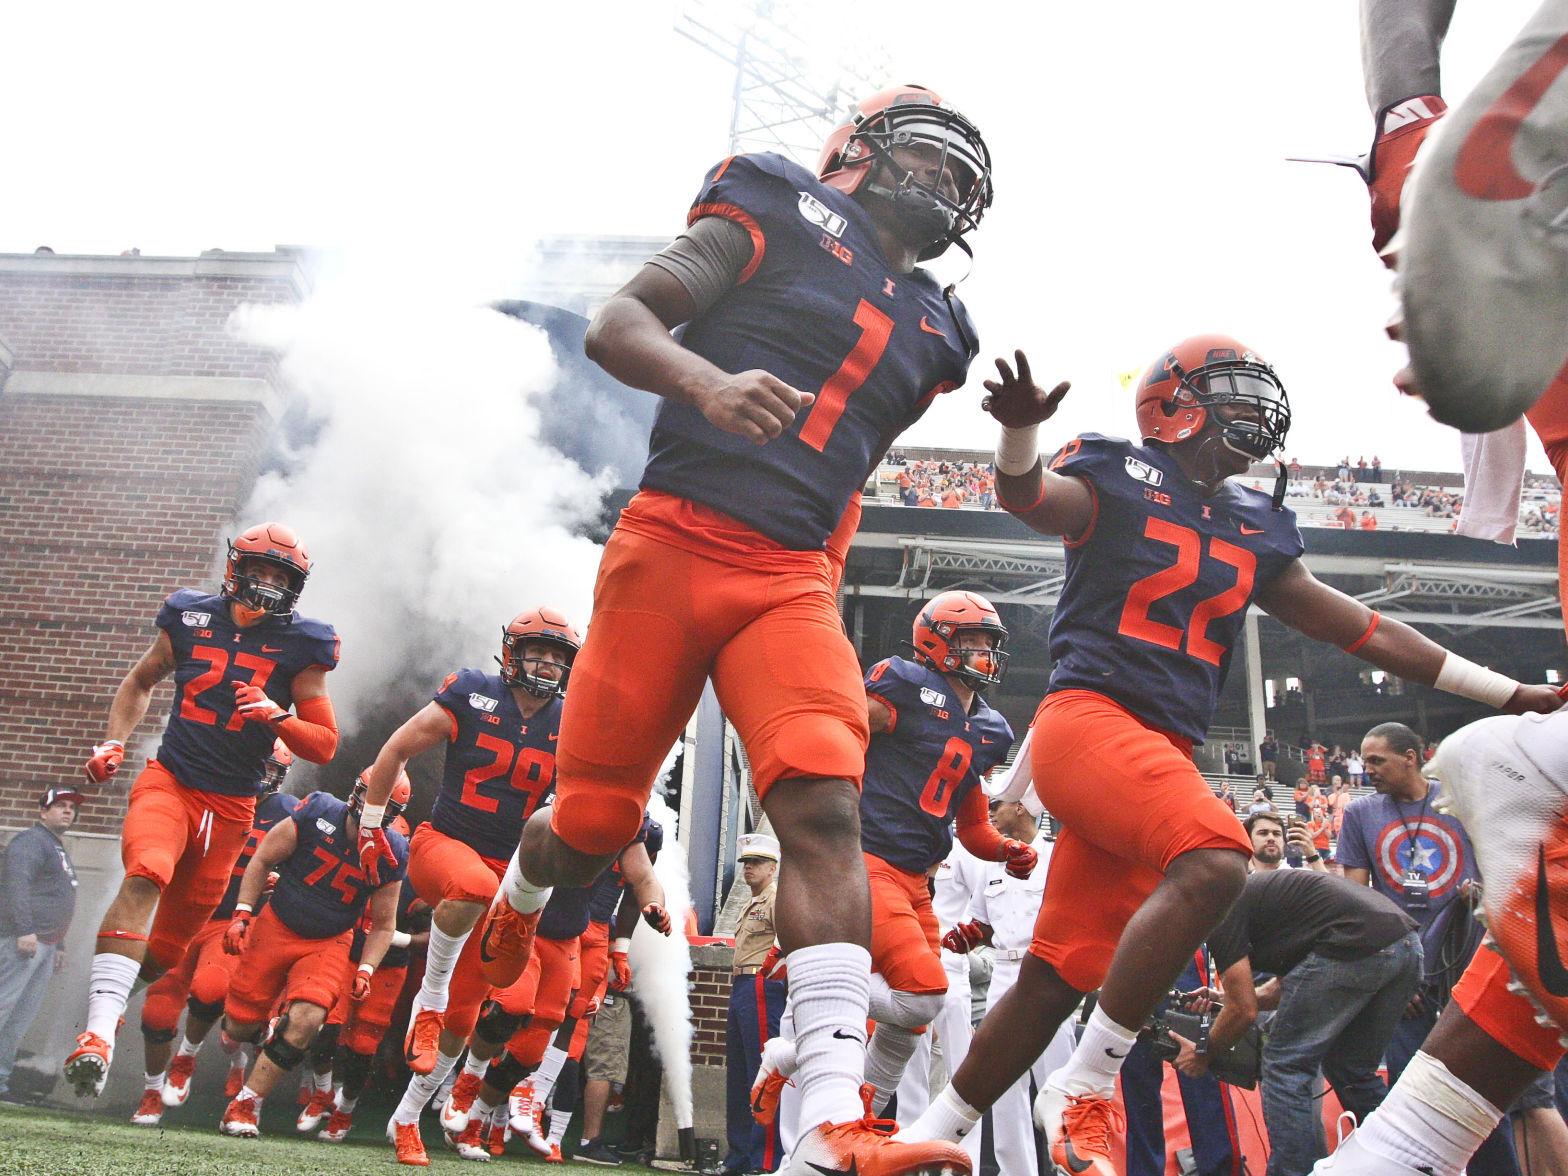 Illinois Football To Ban Tailgating Limit Memorial Stadium To 20 Capacity And Require Masks During The 2020 Season Sports Pantagraph Com